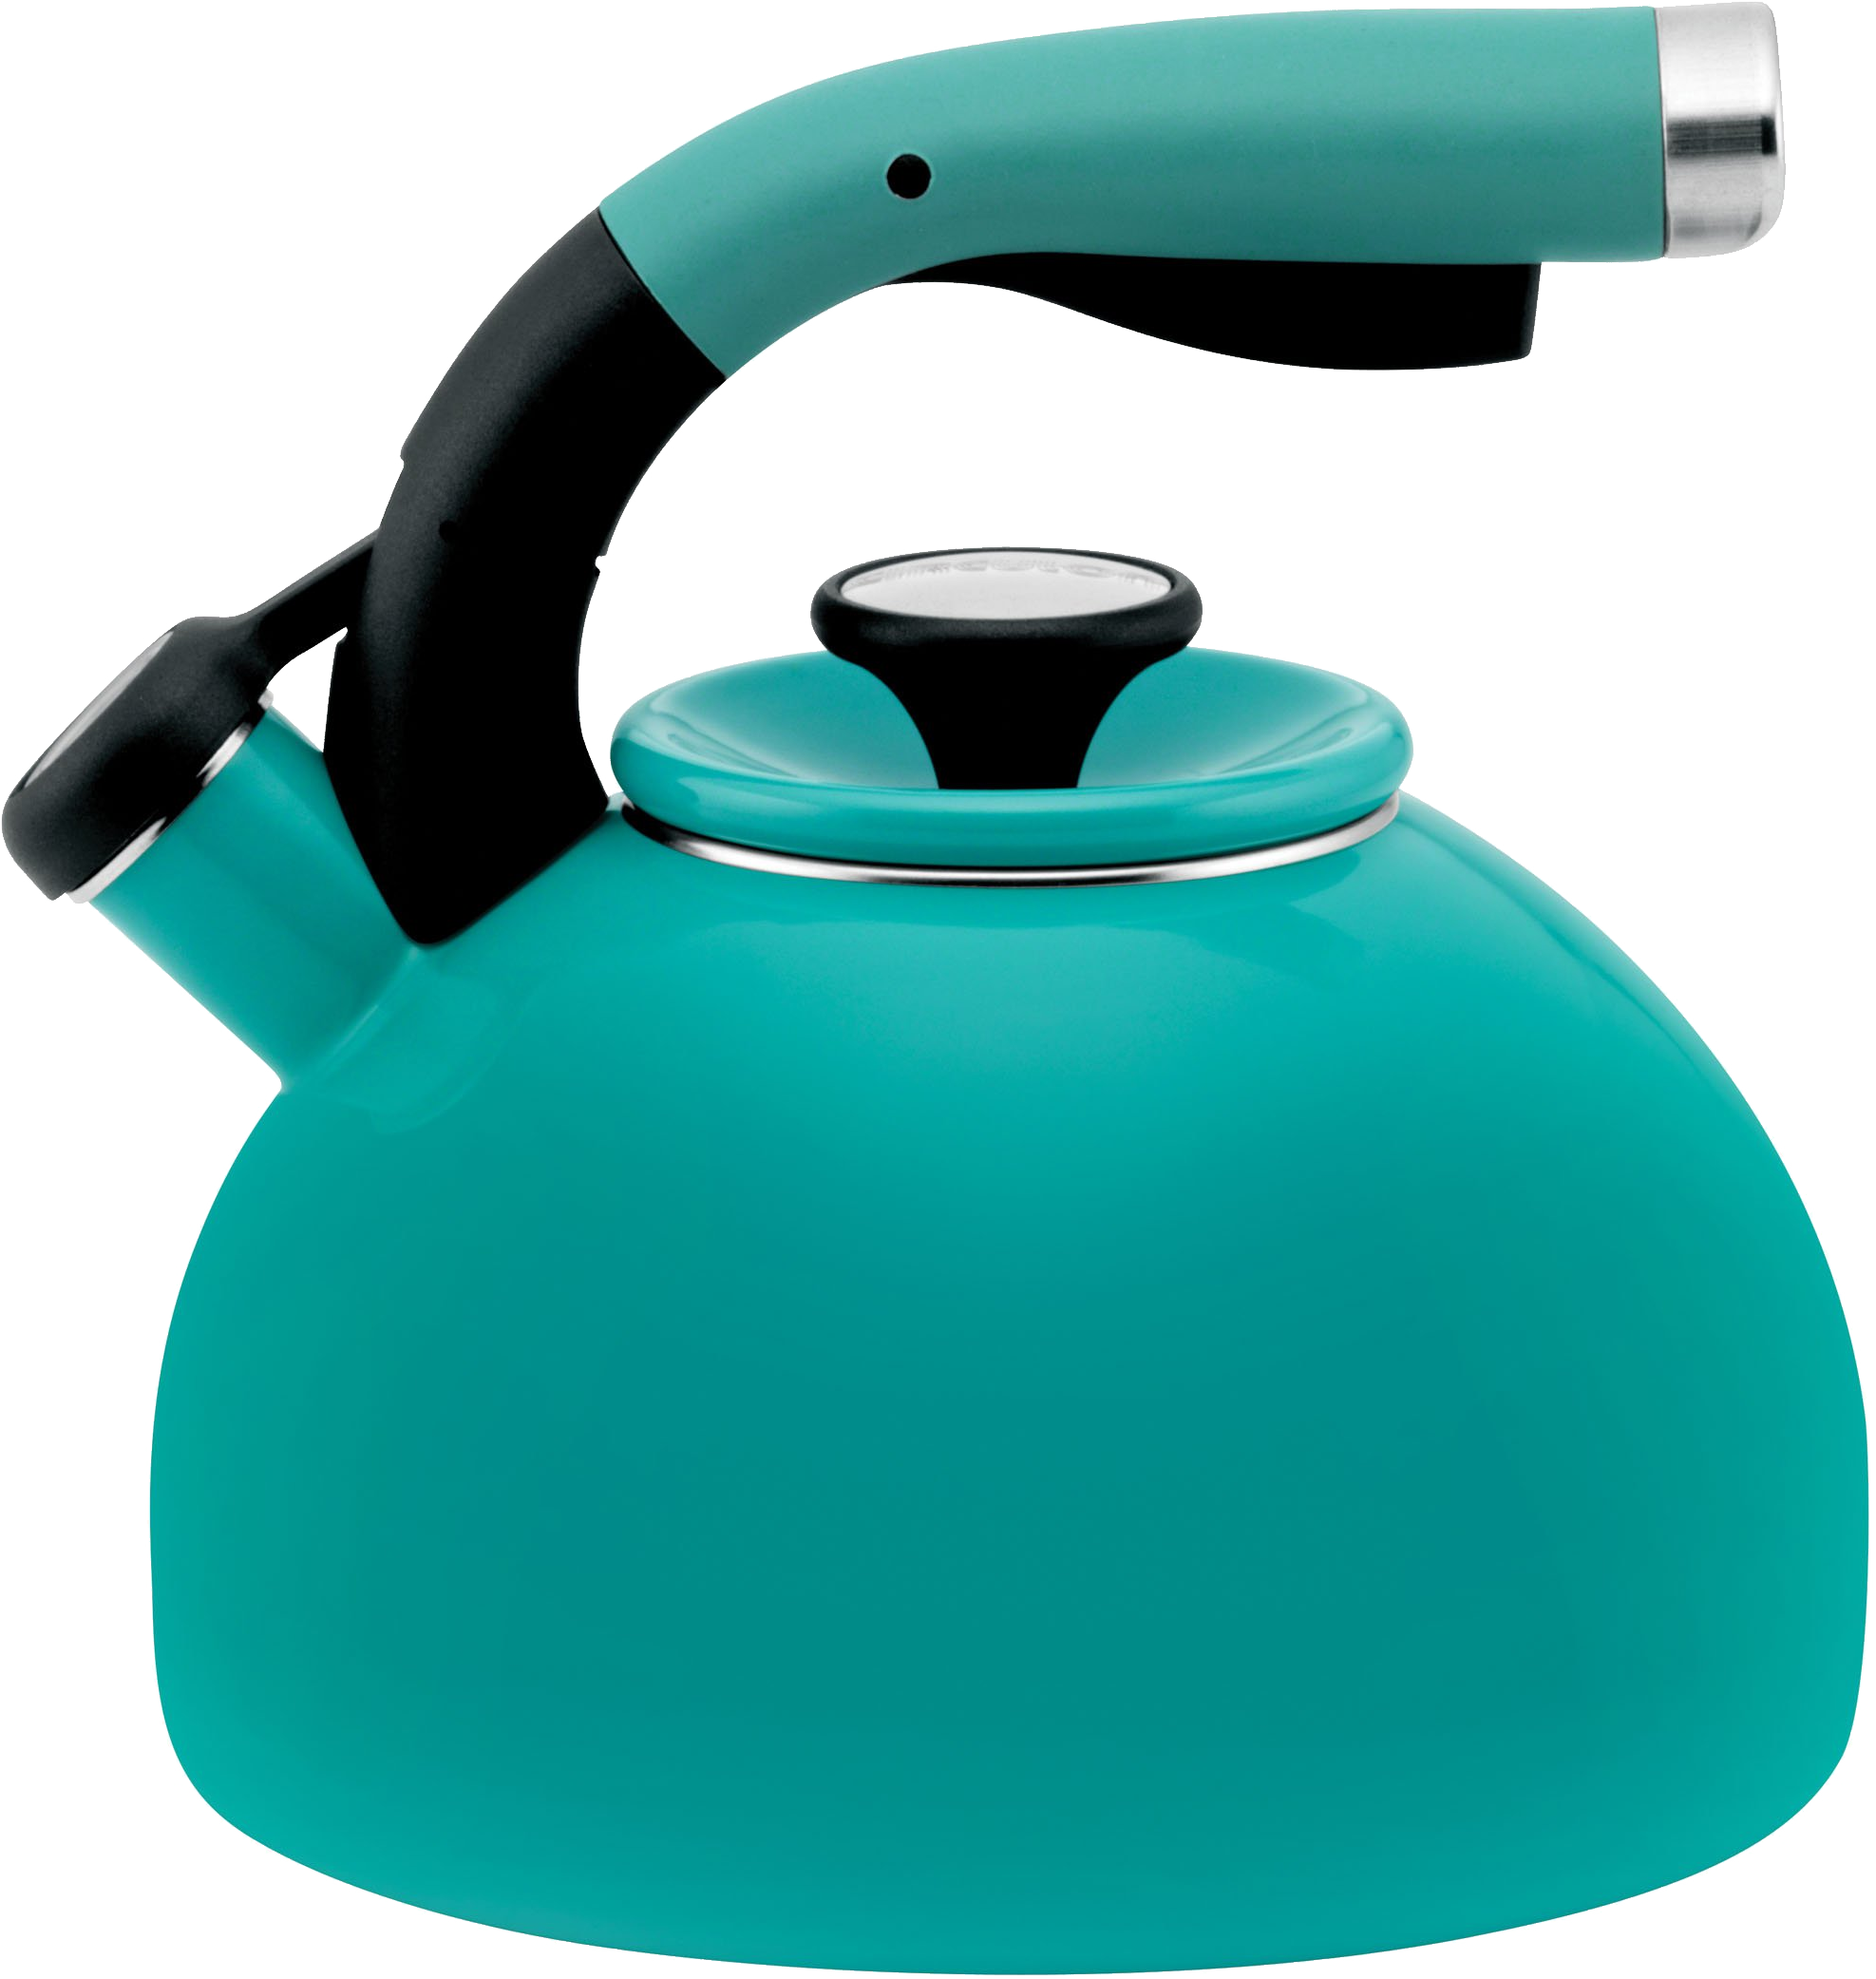 clipart of kettle - photo #22